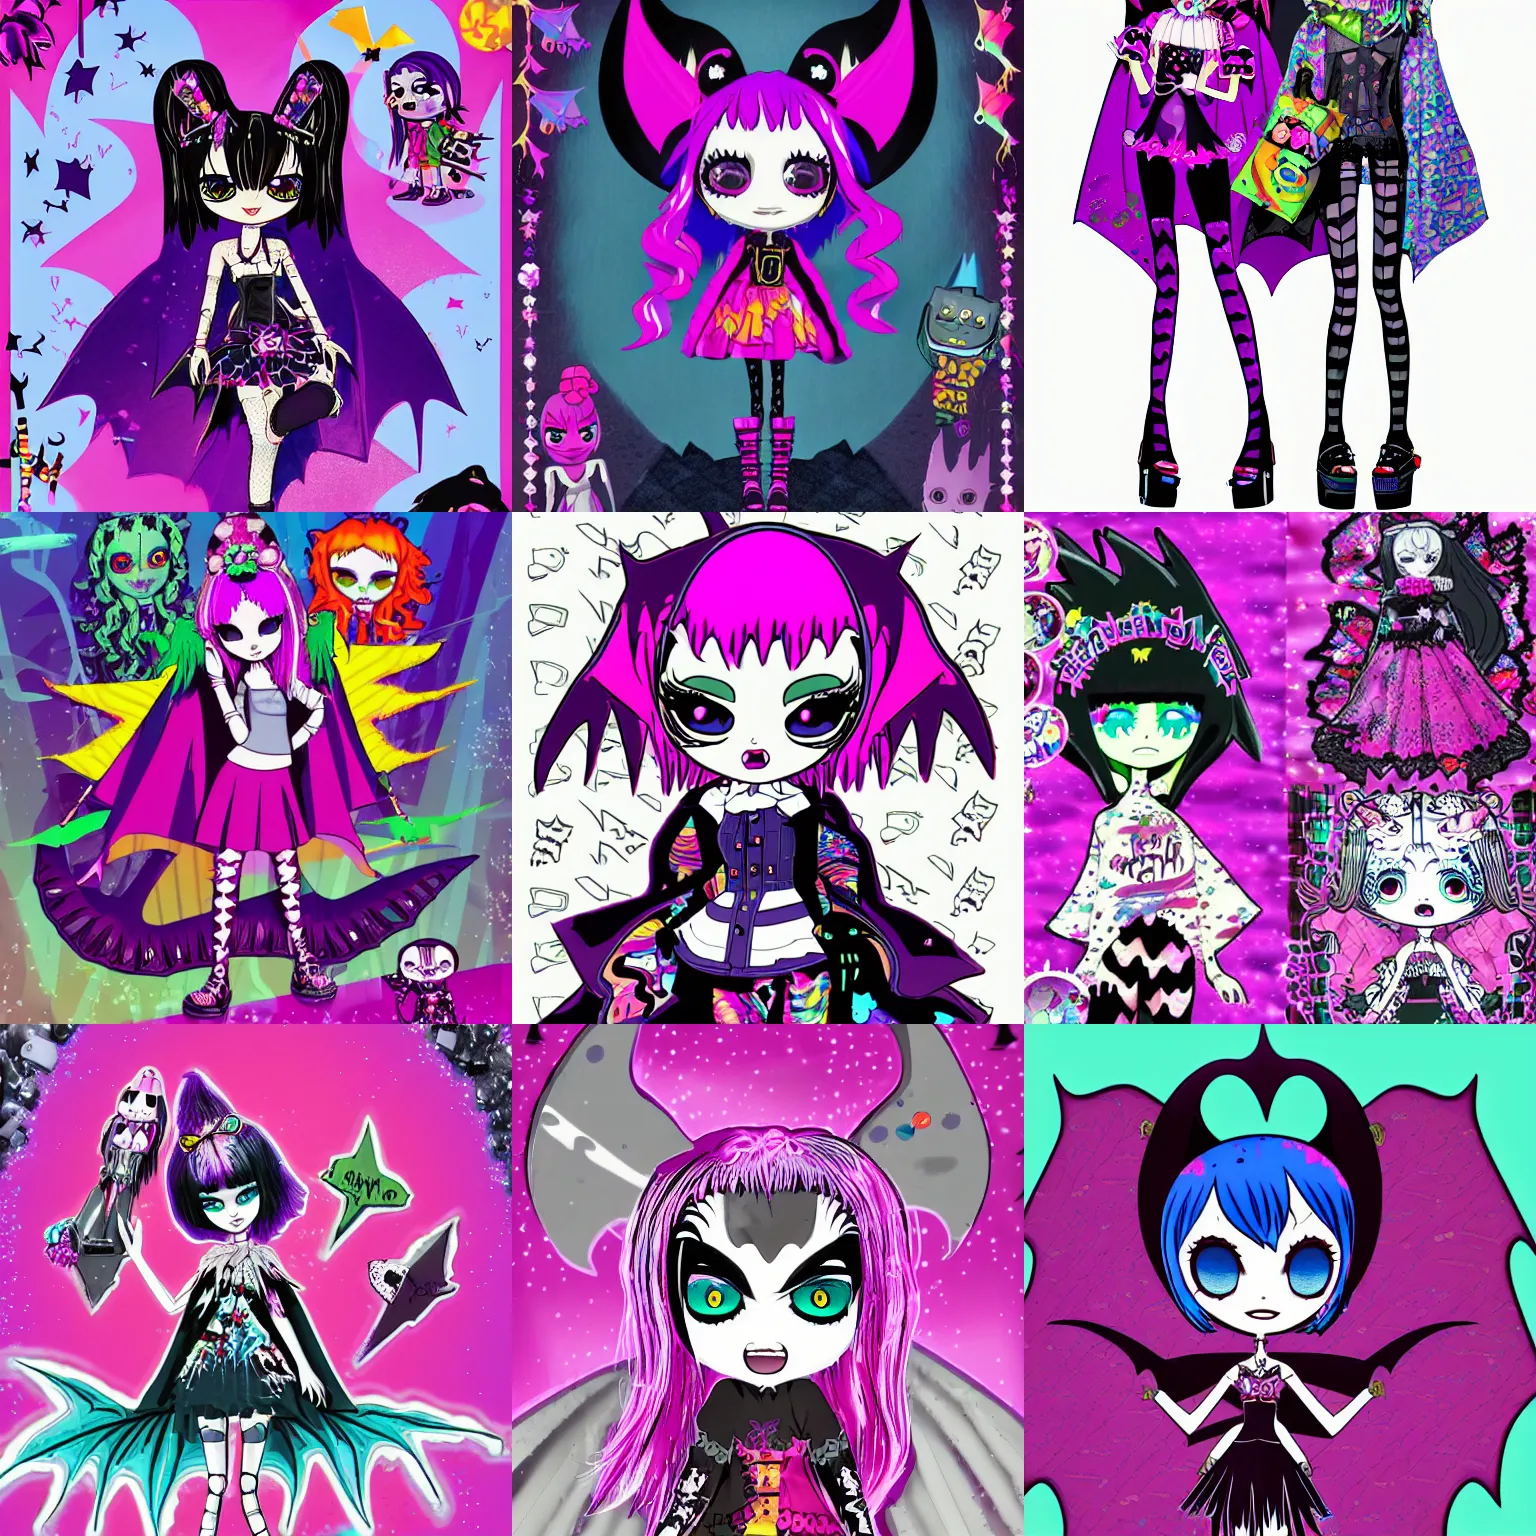 Prompt: lisa frank gothic emo punk decora vampiric rockstar vampire squid wearing a bat shaped poncho cape with platform shoes character designs of various shapes and sizes by genndy tartakovsky and monster high for the new hotel transylvania film | sanrio glitchcore yokai girl, shadowverse character concept, found footage horror, glitter gif